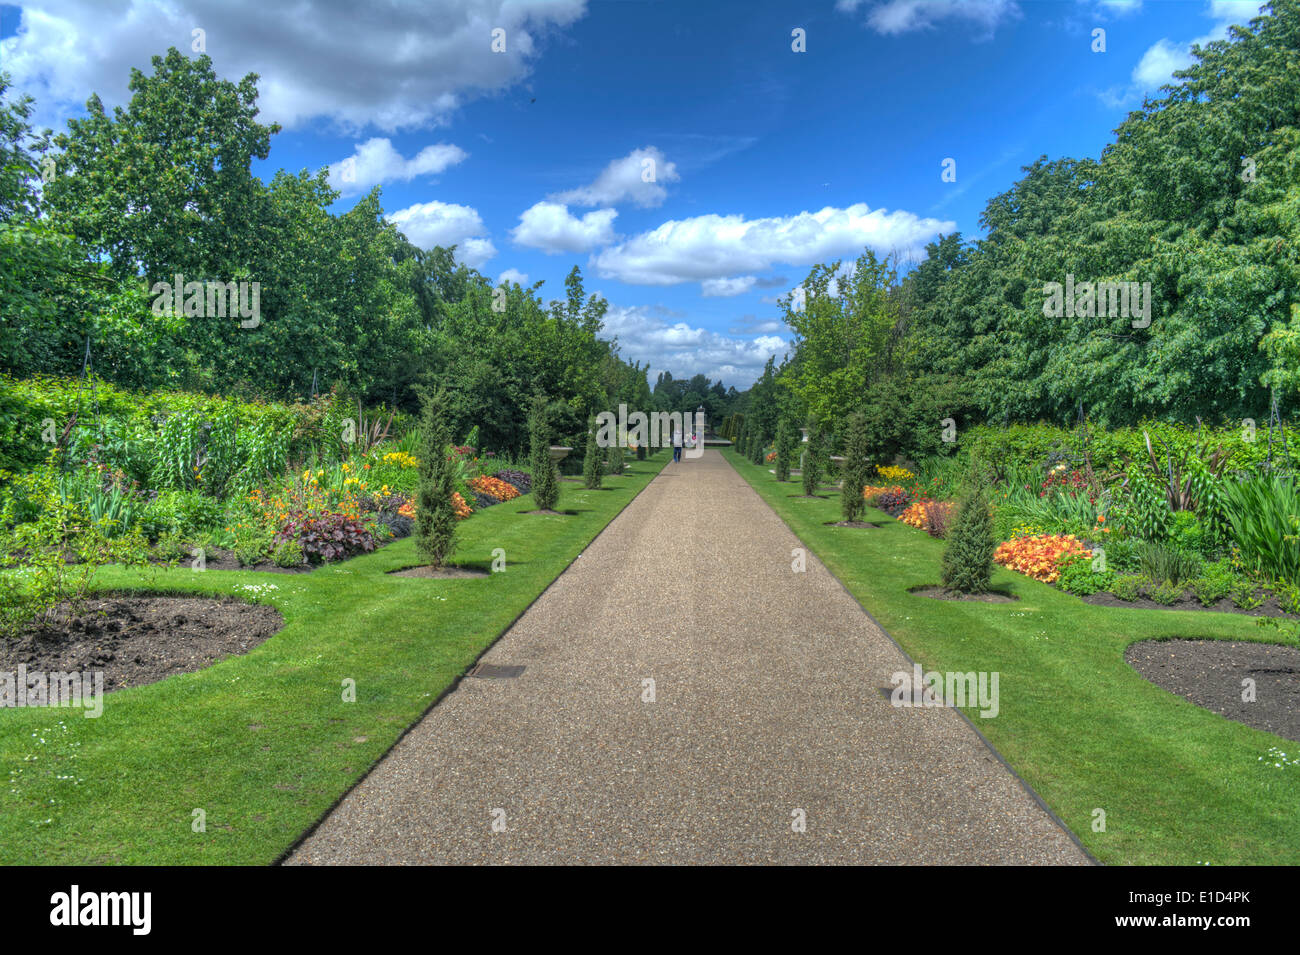 HDR image of flower beds and walkway in Regents Park, London, England Stock Photo